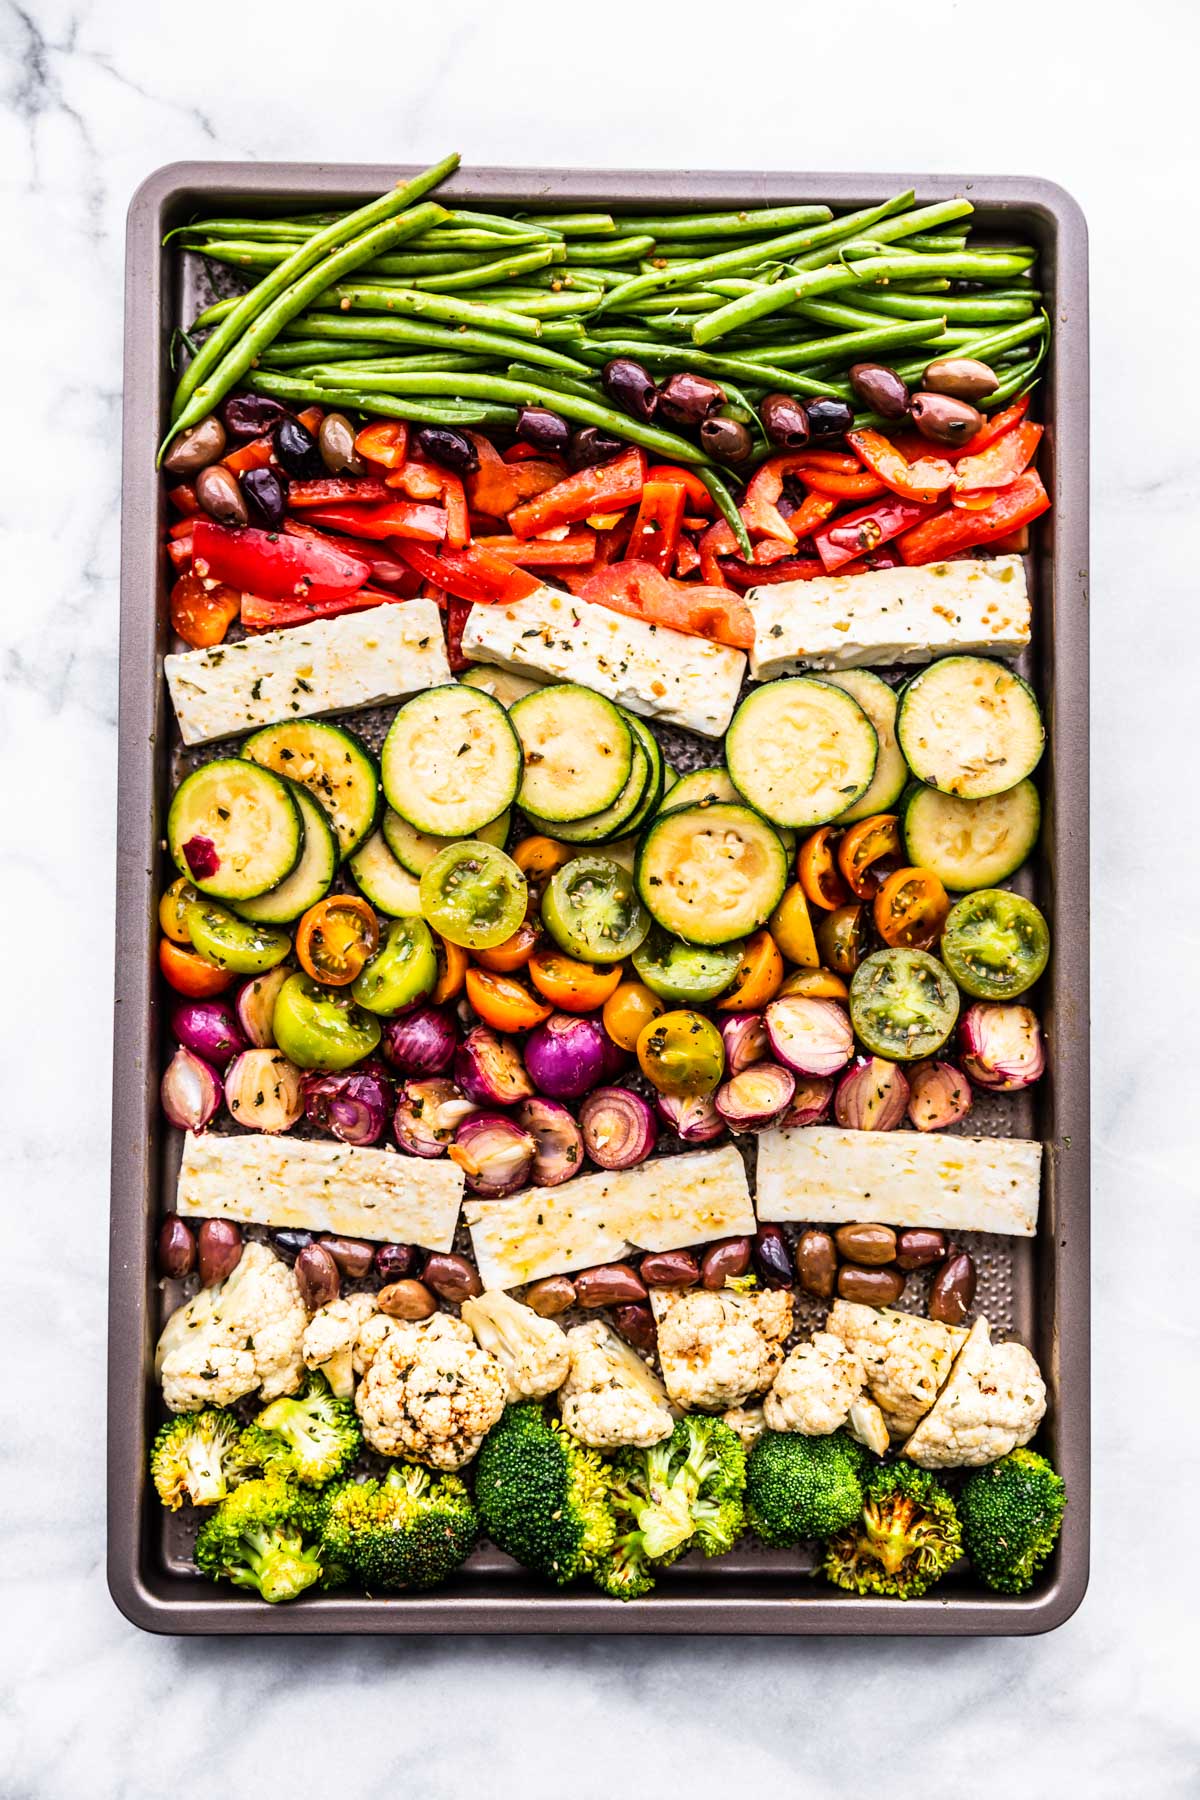 Baking sheet filled with Greek seasoned fresh veggies and feta ready for the oven.